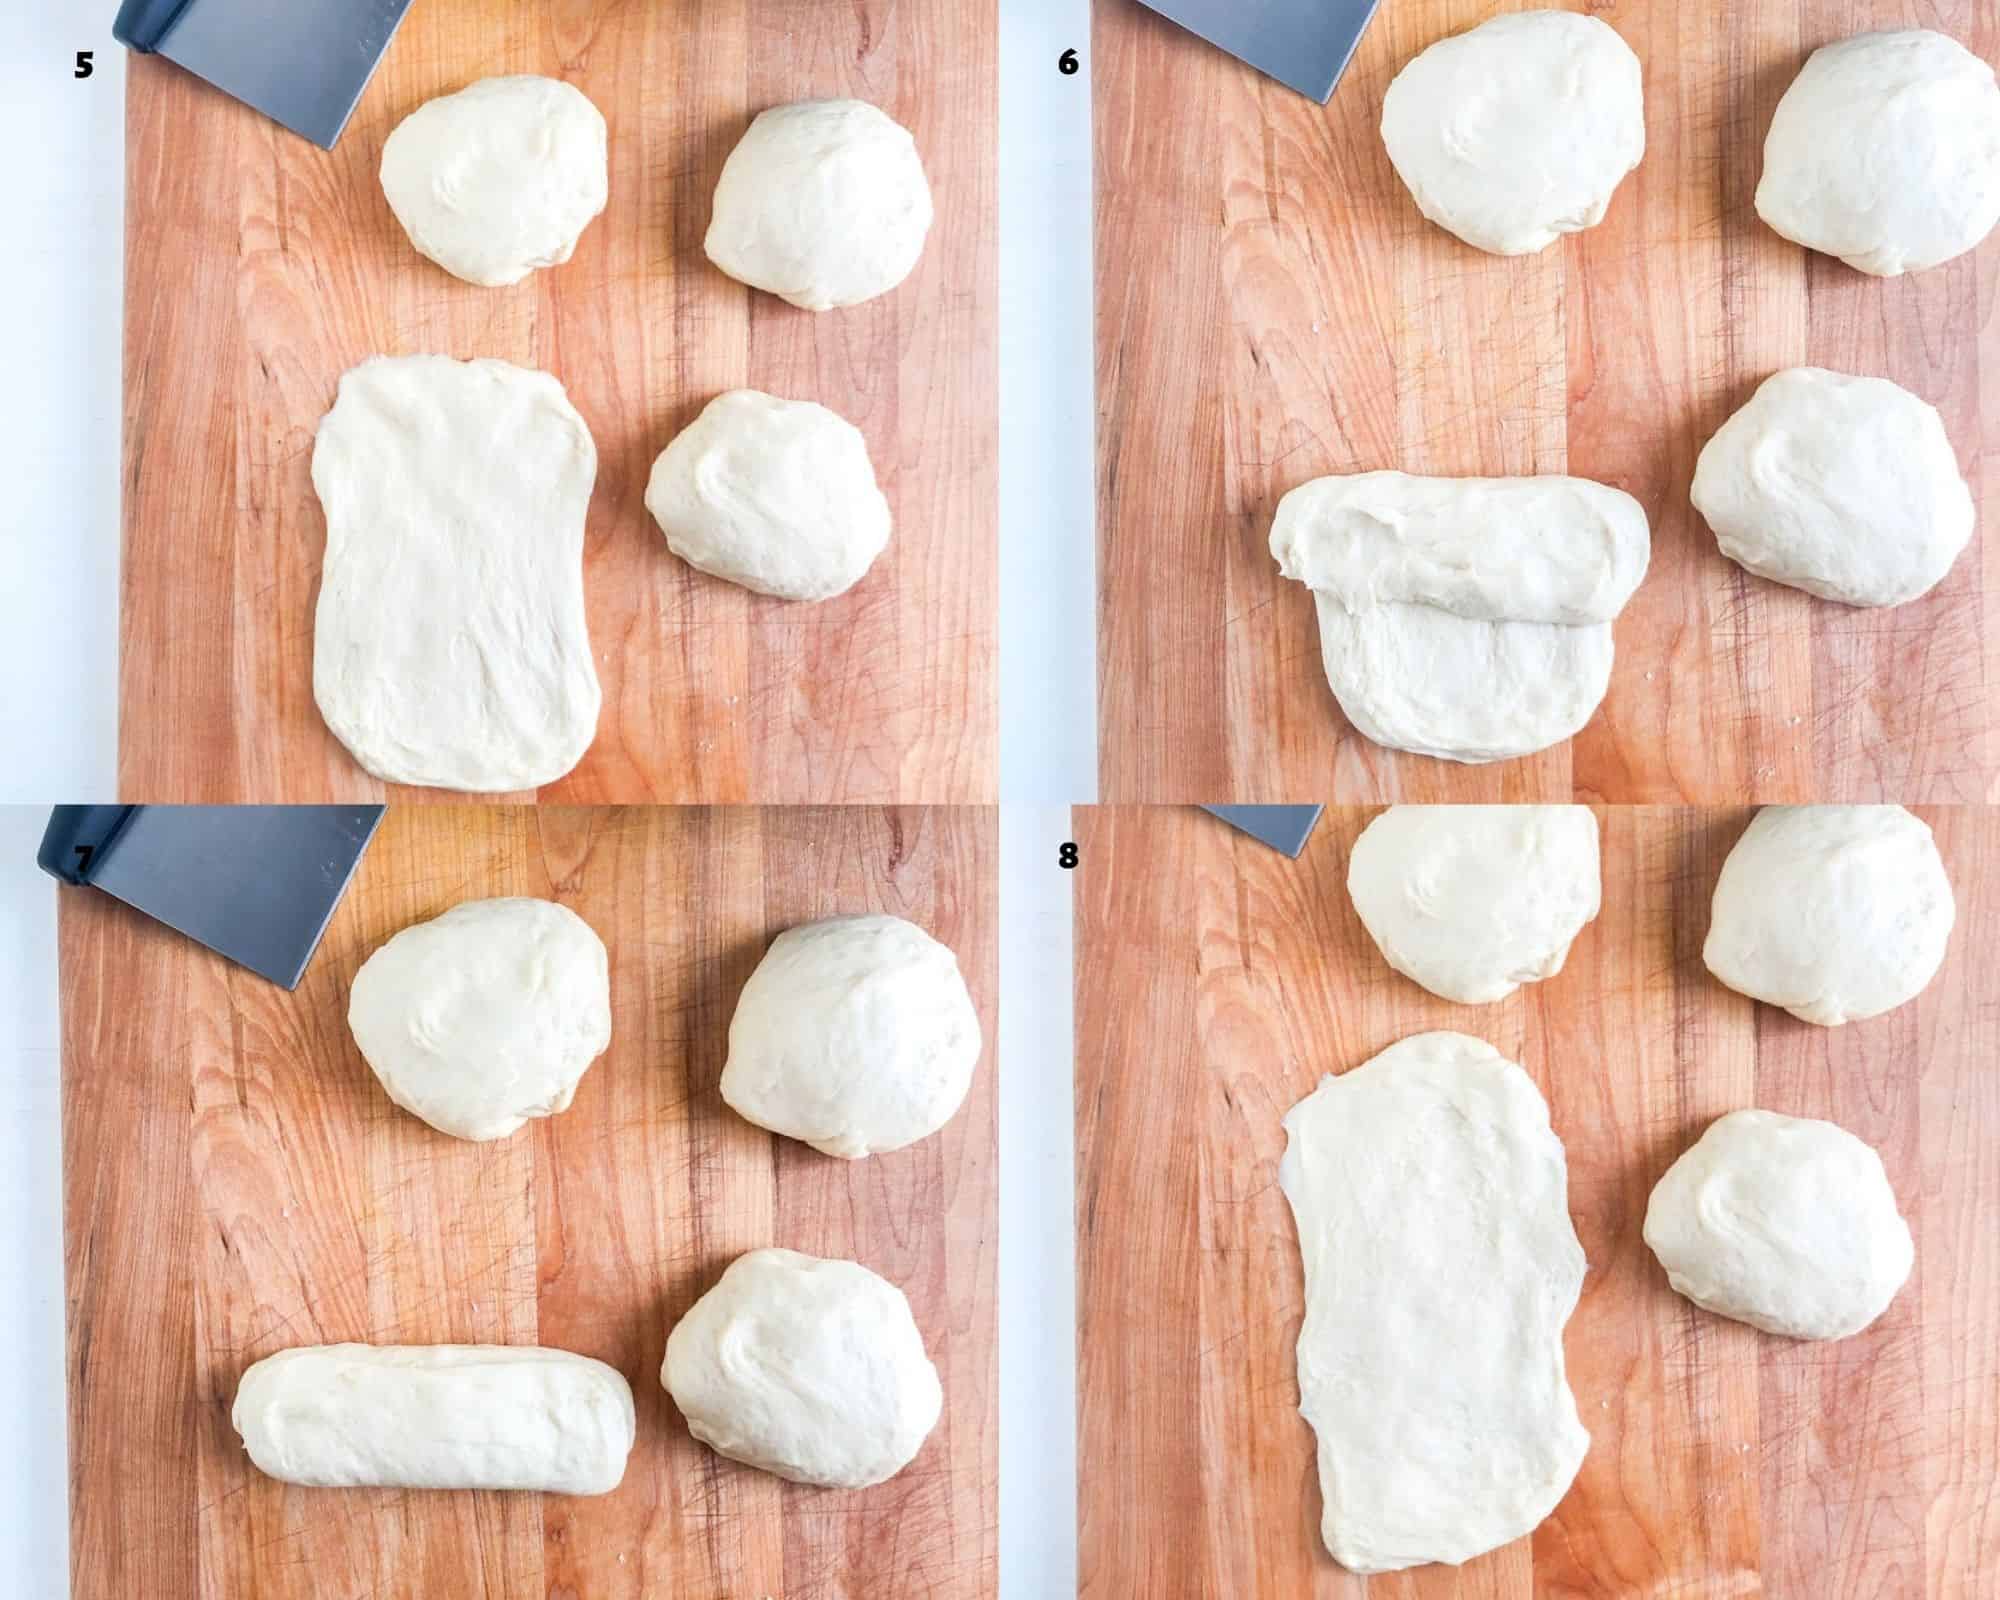 Process shots for rolling out the bread dough.